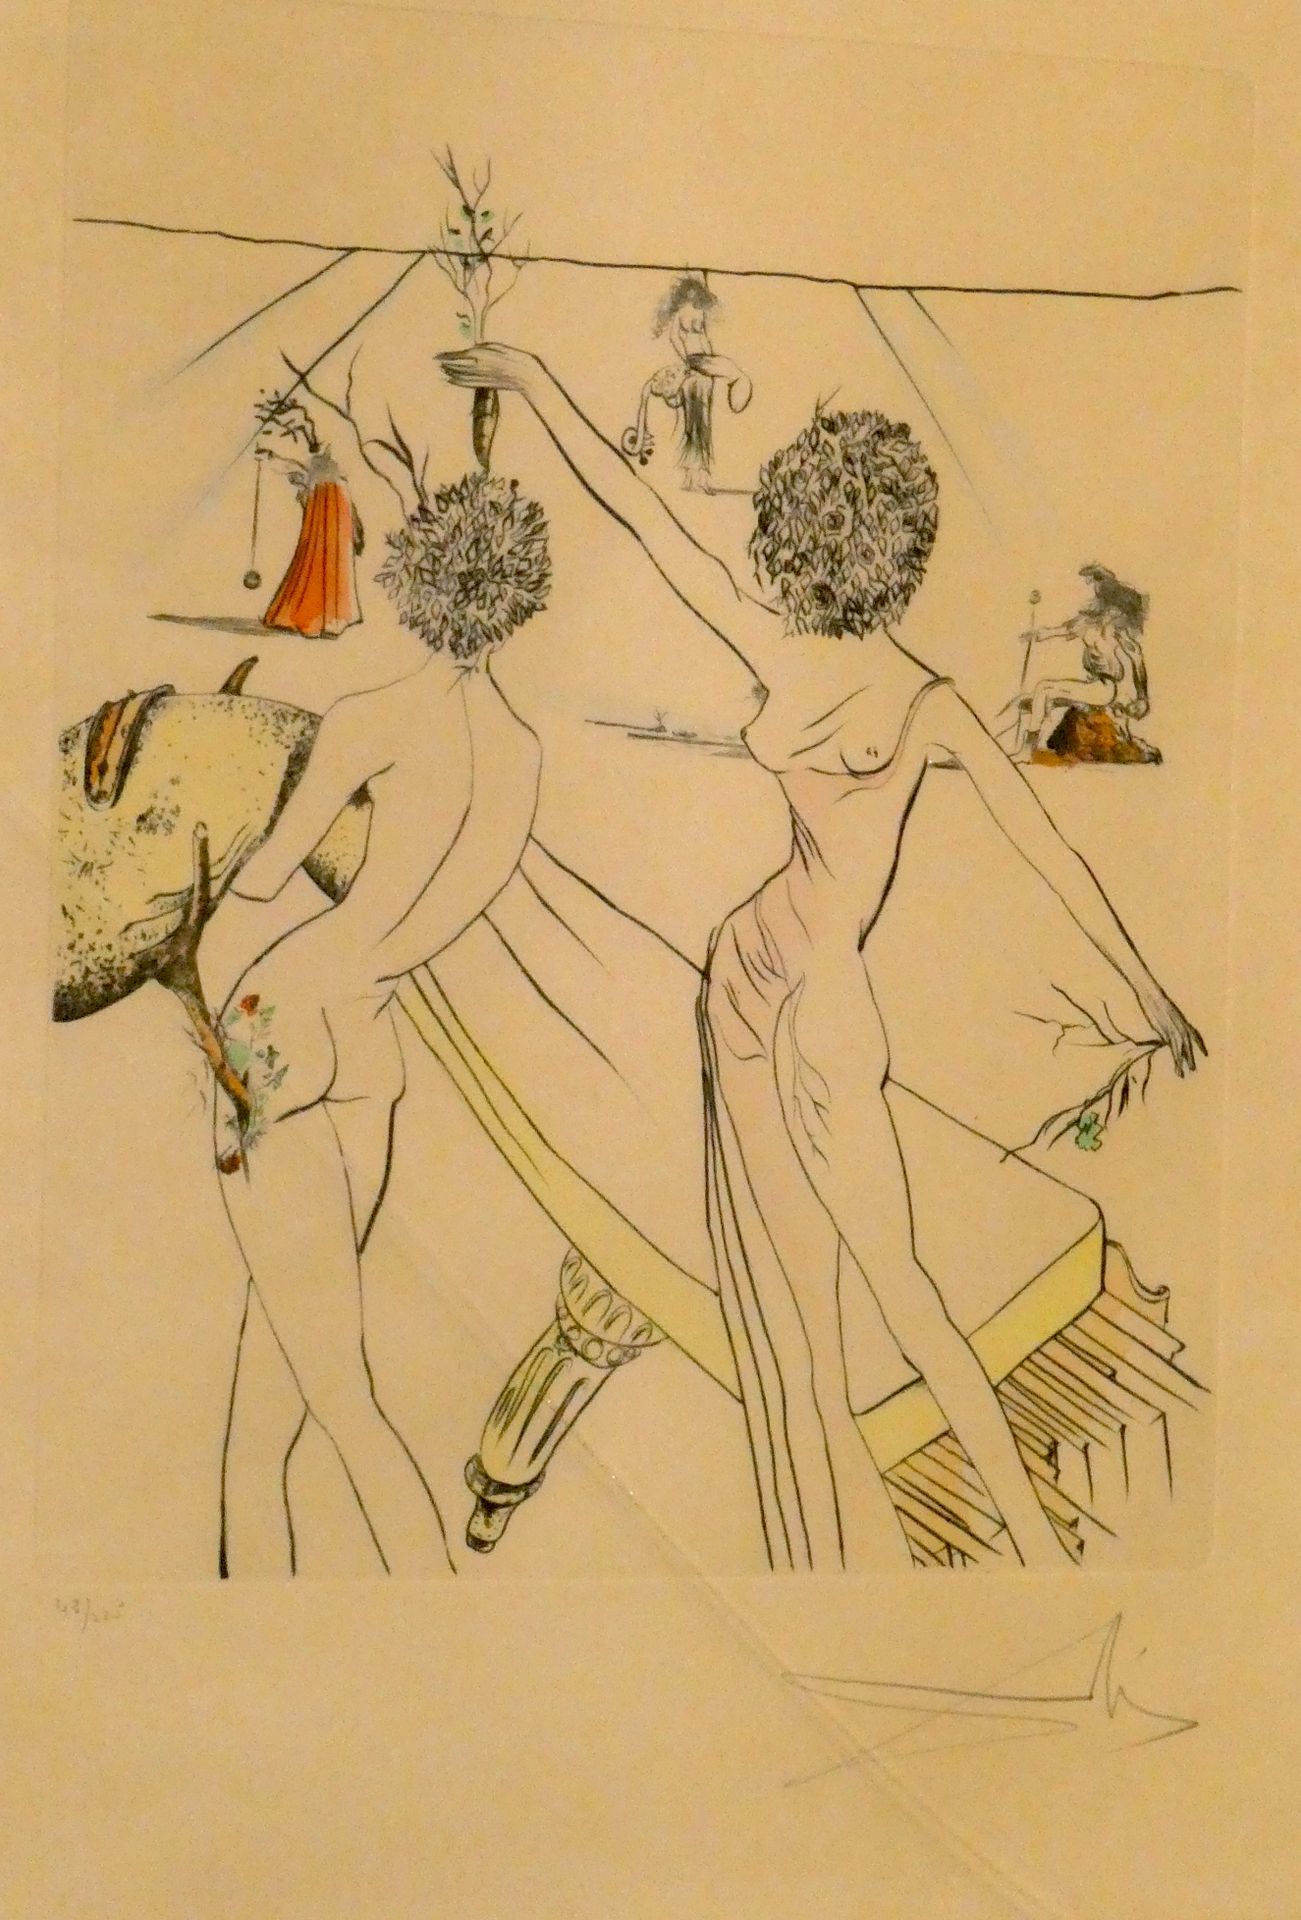 Null Salvador DALI (1904-1989)

Naked

Engraving numbered 48 / 225

Size: 56 x 3&hellip;